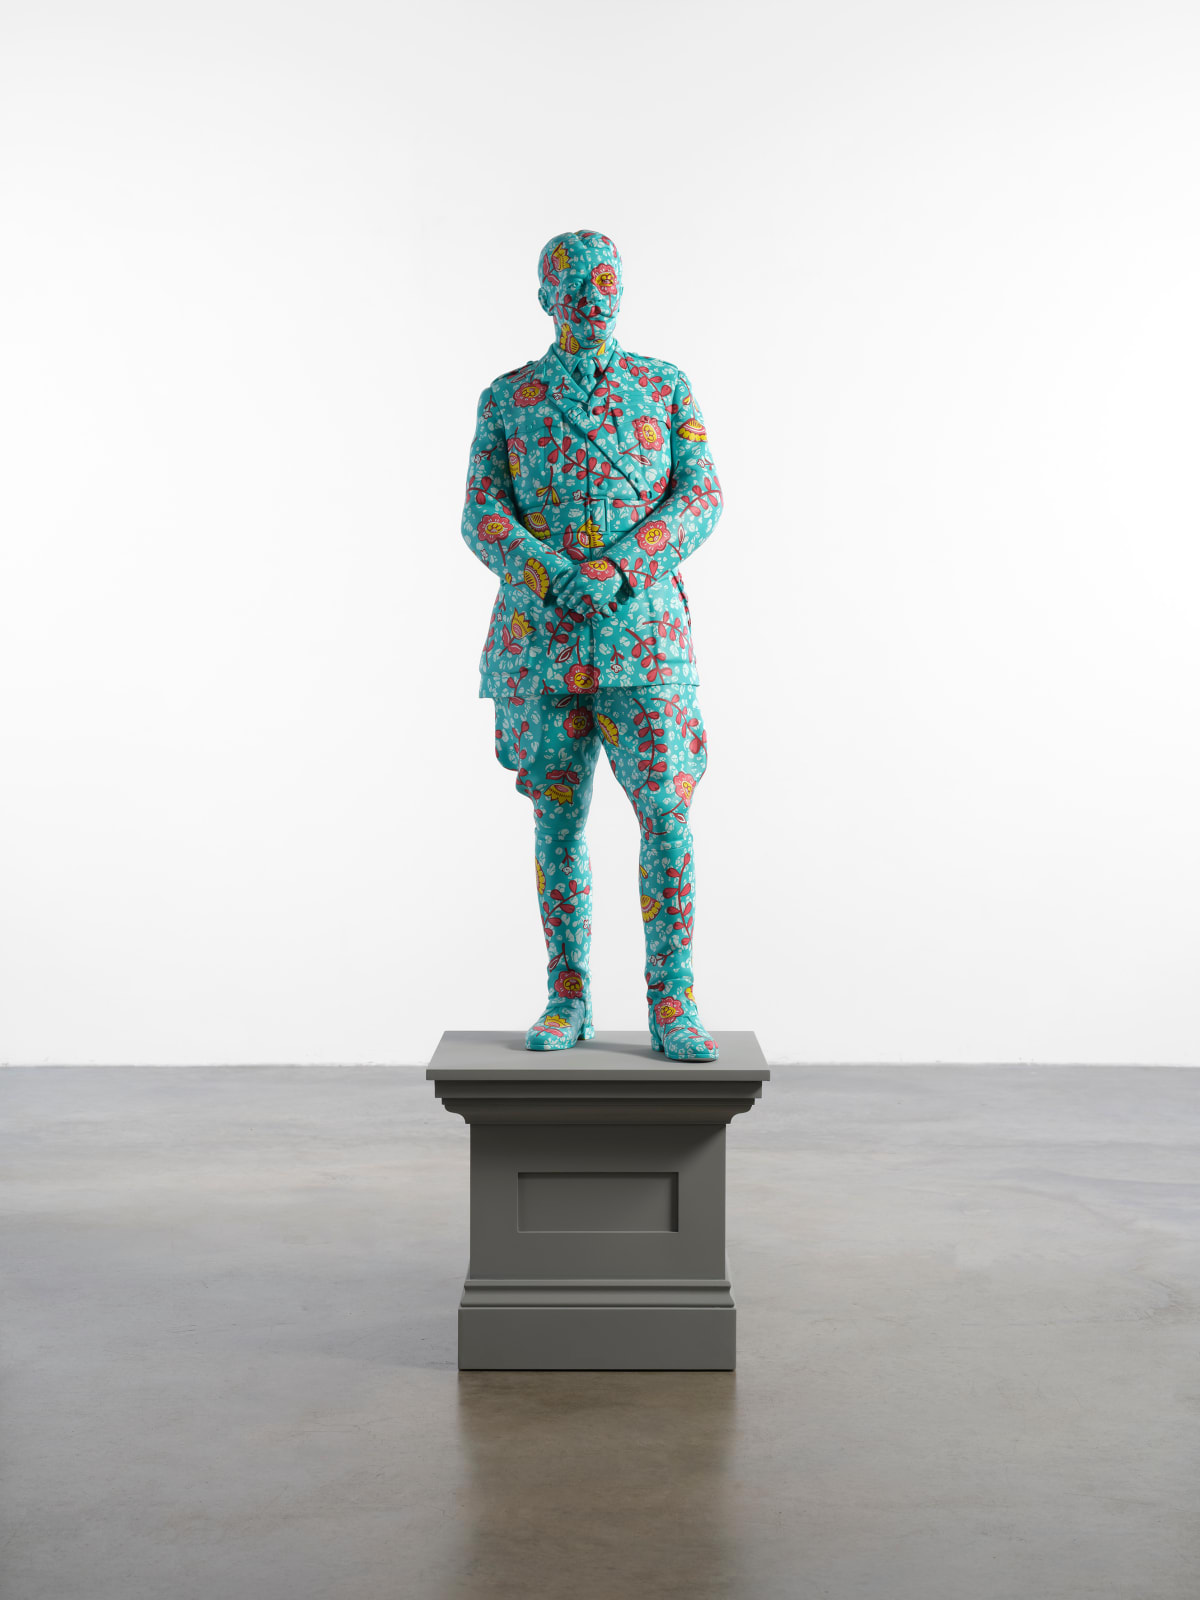 <div class="artist">Yinka Shonibare CBE RA</div><div class="title_and_year"><span class="title">Decolonised Structures (Kitchener)</span><span class="year">, 2022</span></div>